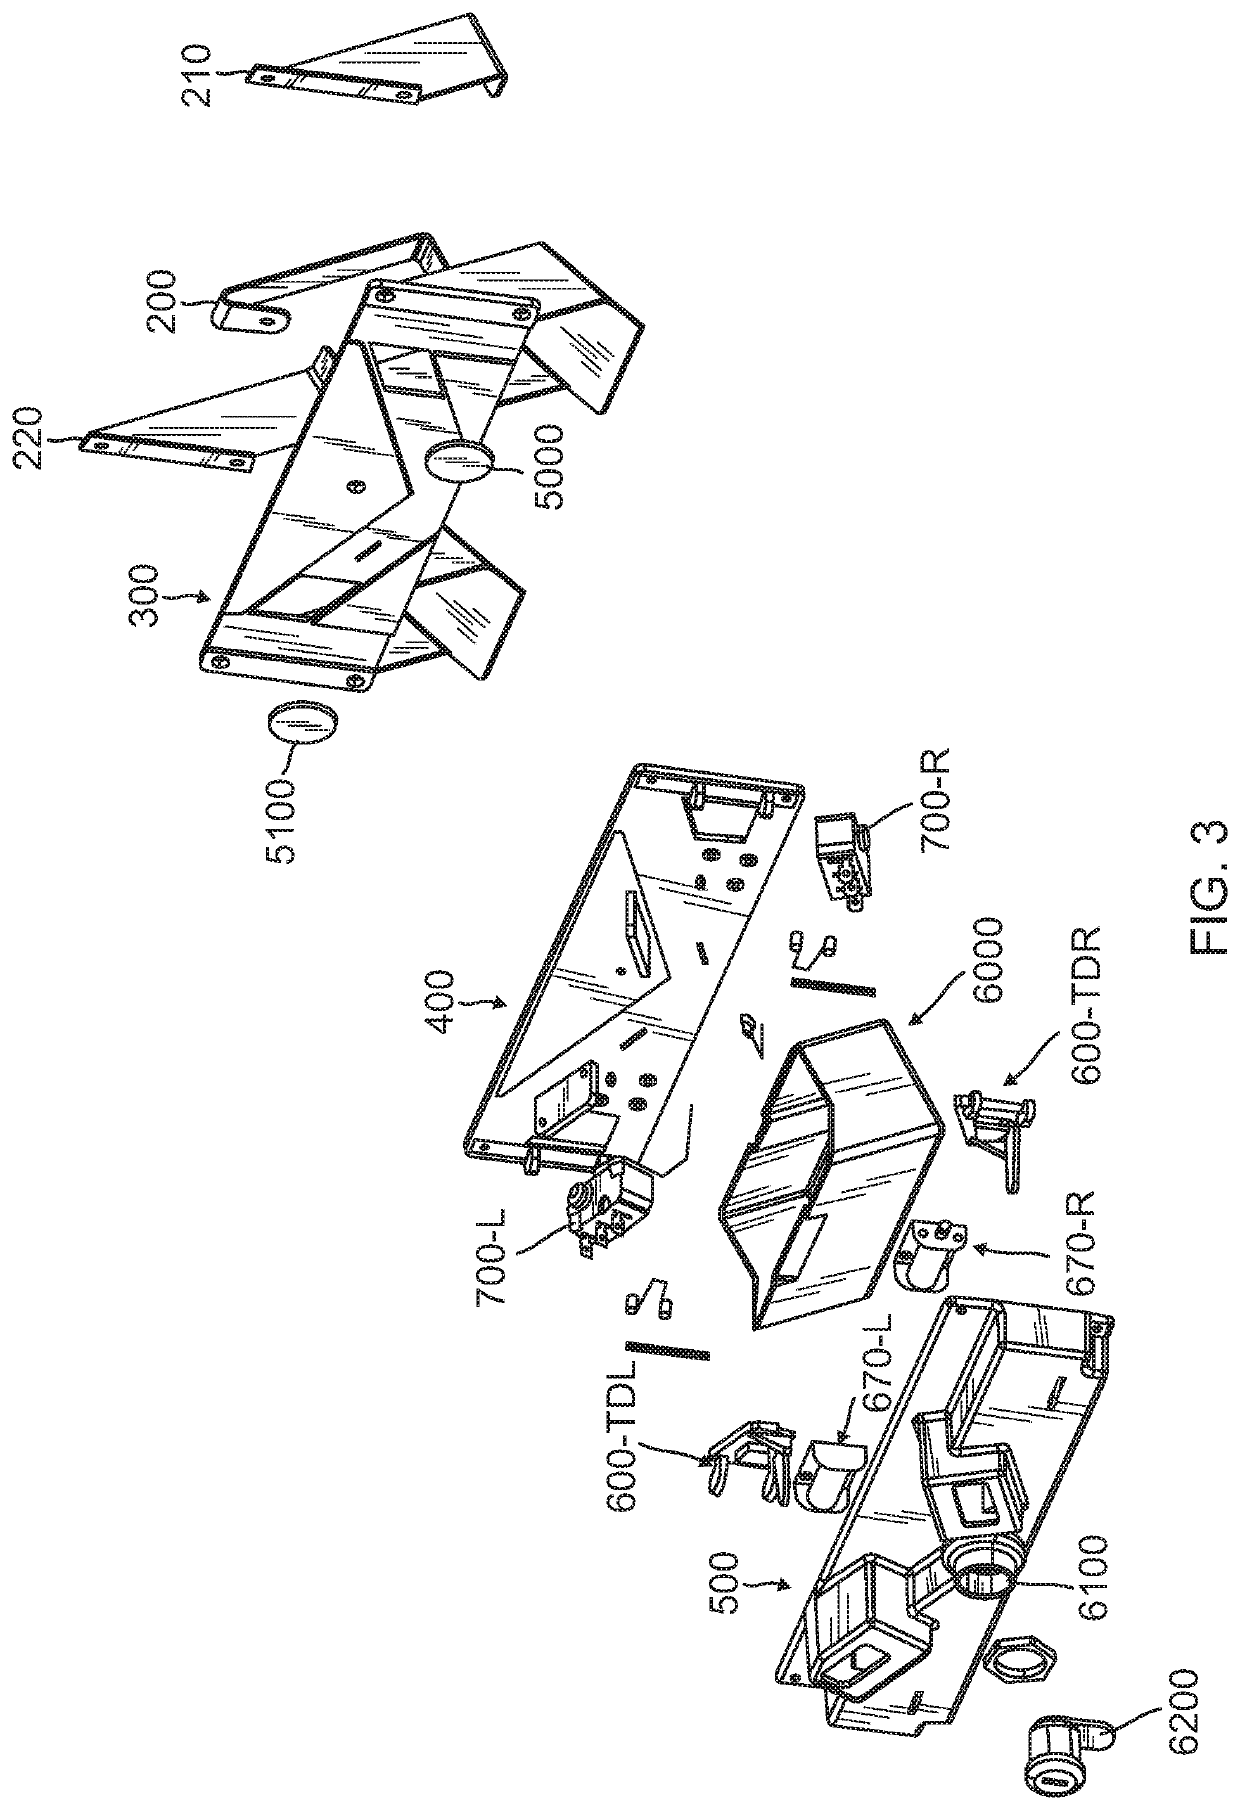 Apparatus to dispense two separate products through a coin-operated system